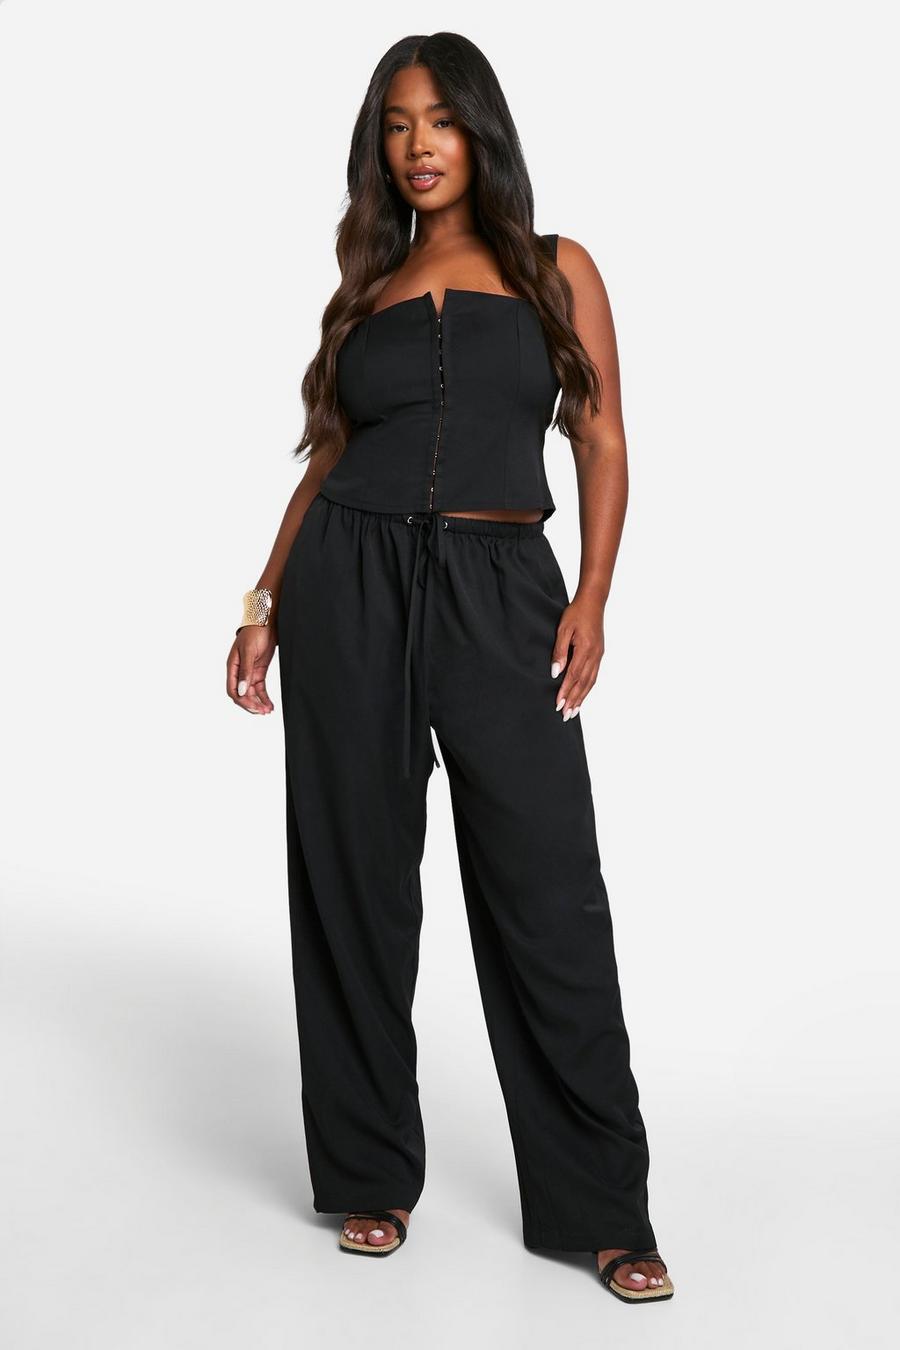 Black Plus Hook And Eye Corset And Slouchy Wide Leg Pants Co-Ord